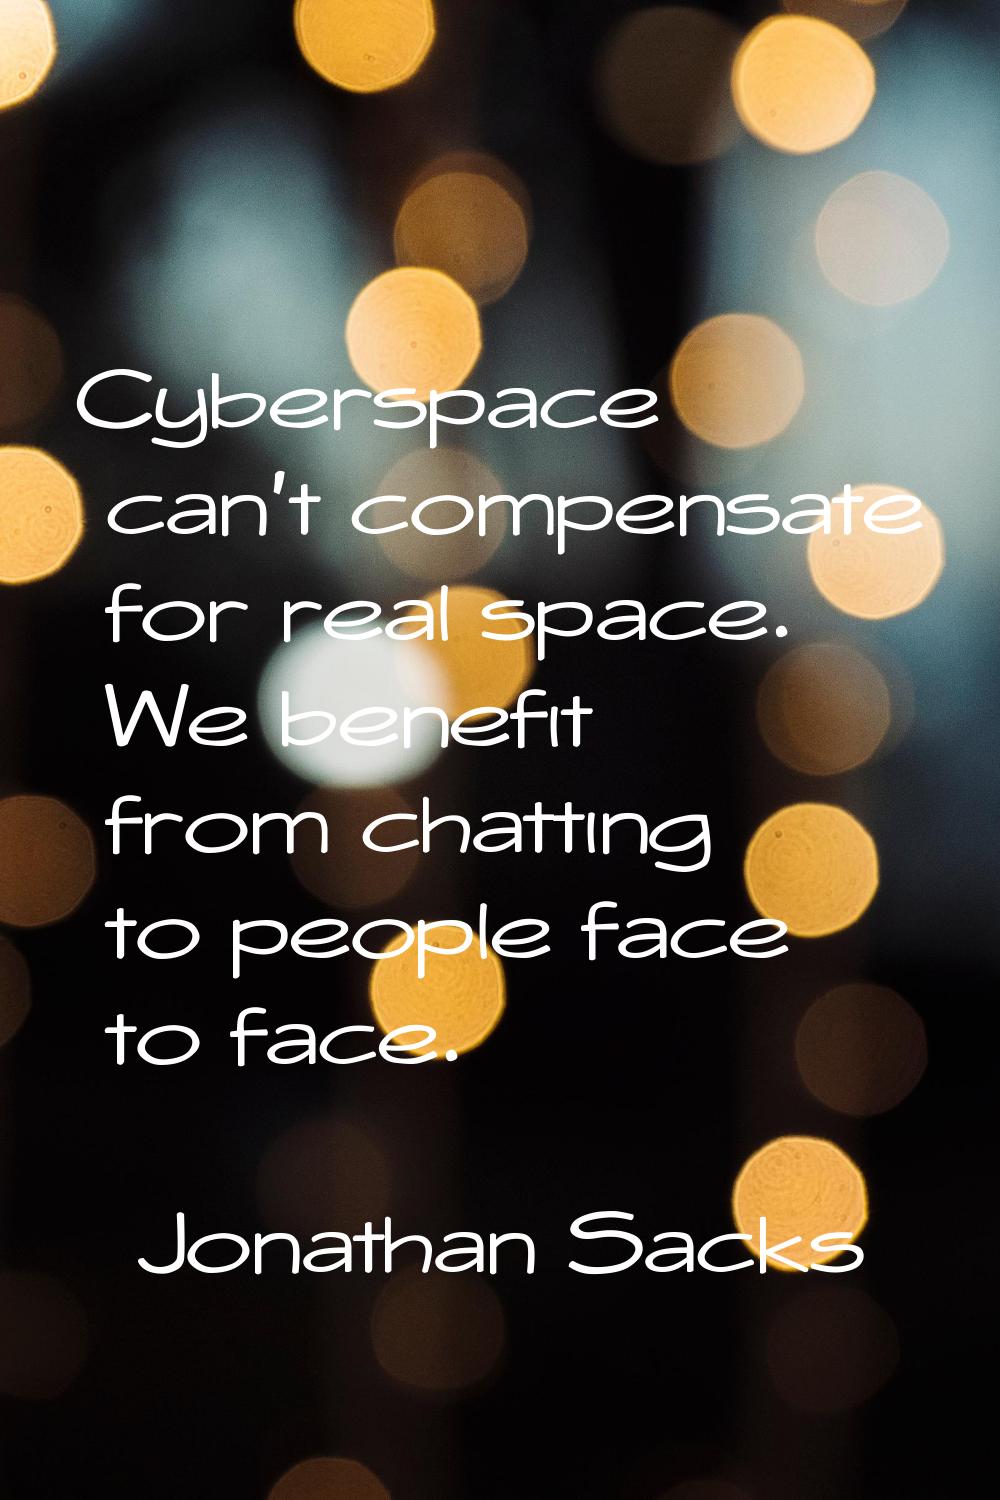 Cyberspace can't compensate for real space. We benefit from chatting to people face to face.